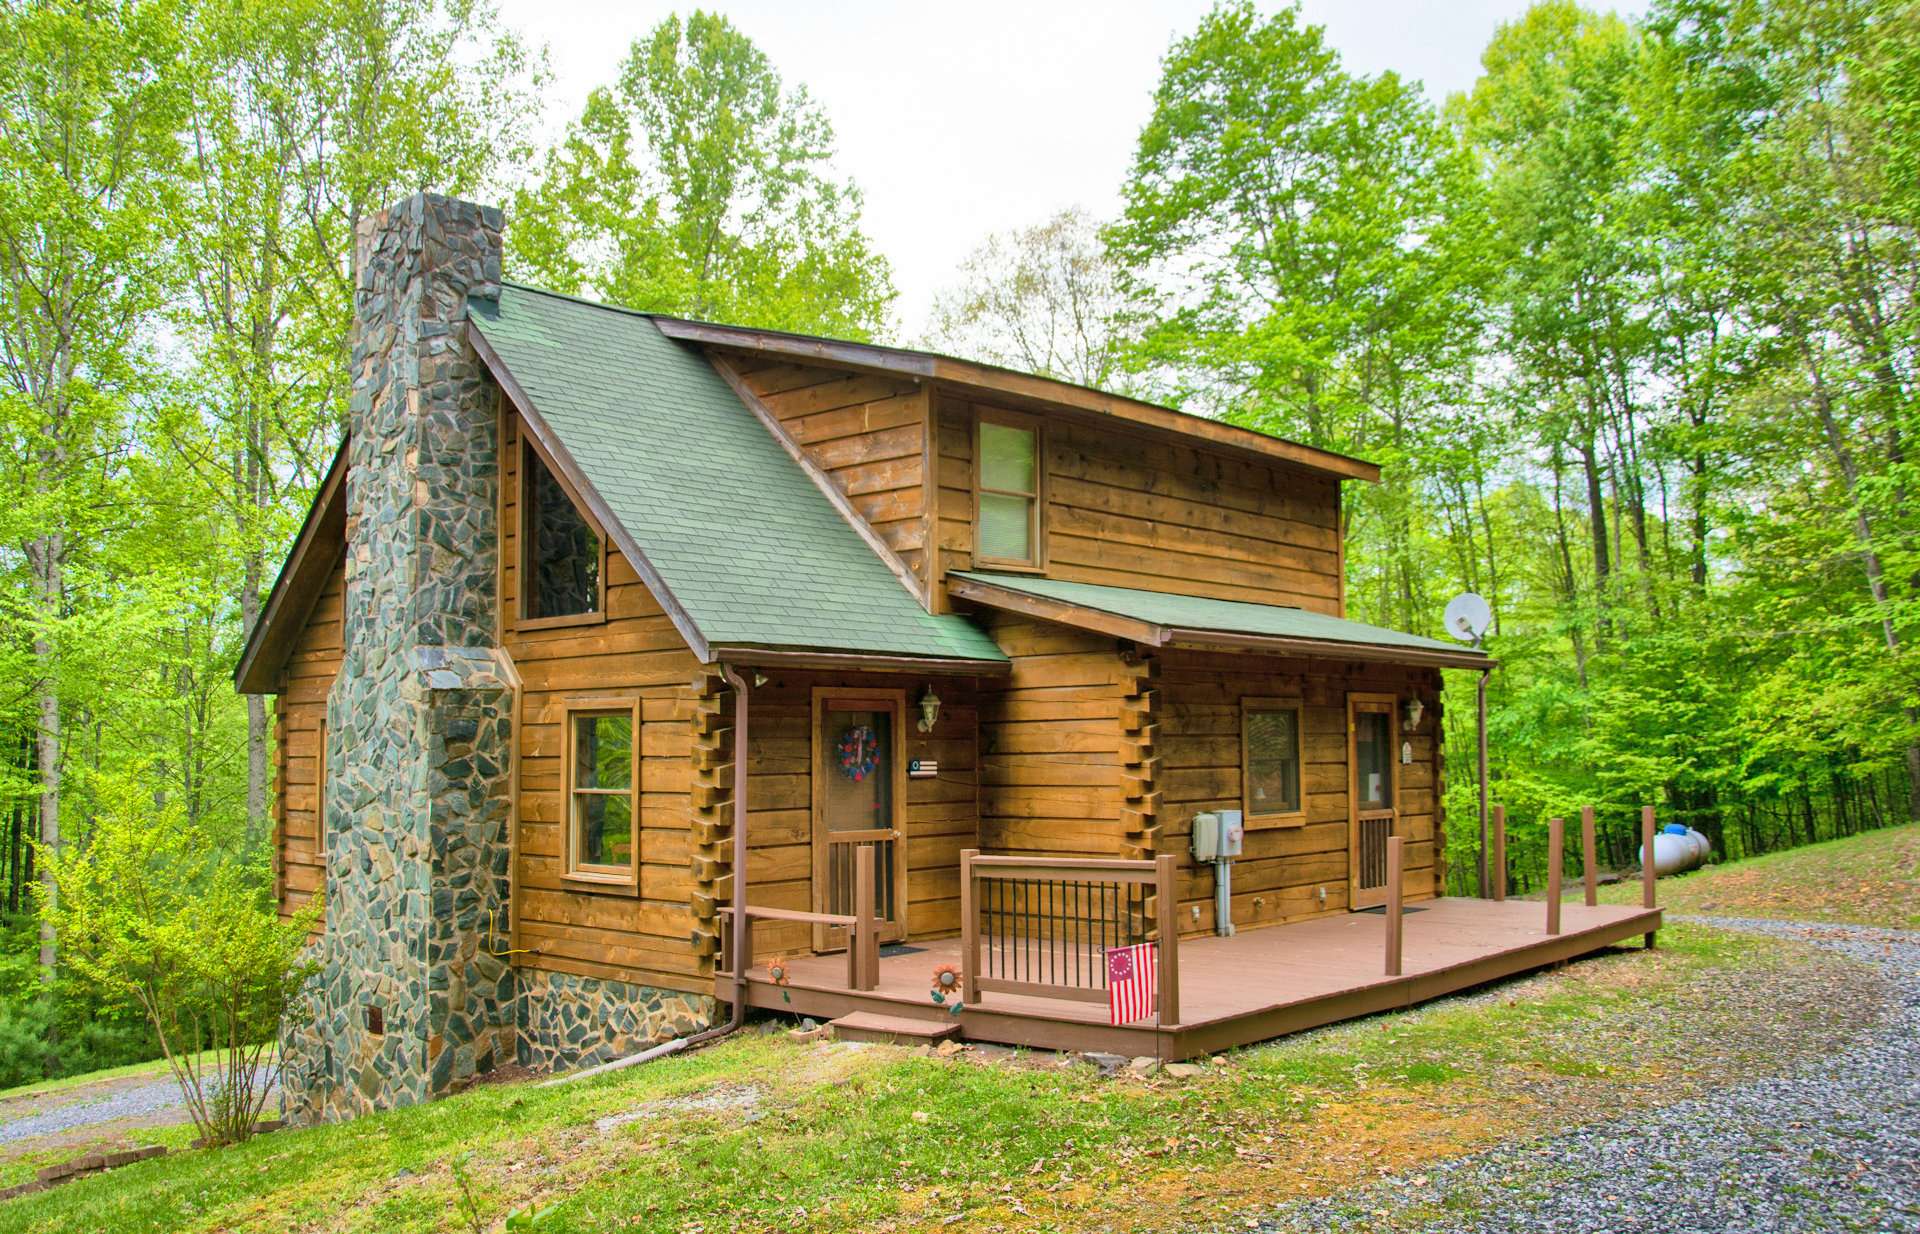 The back deck offers easy access from the graveled drive to the cabin.